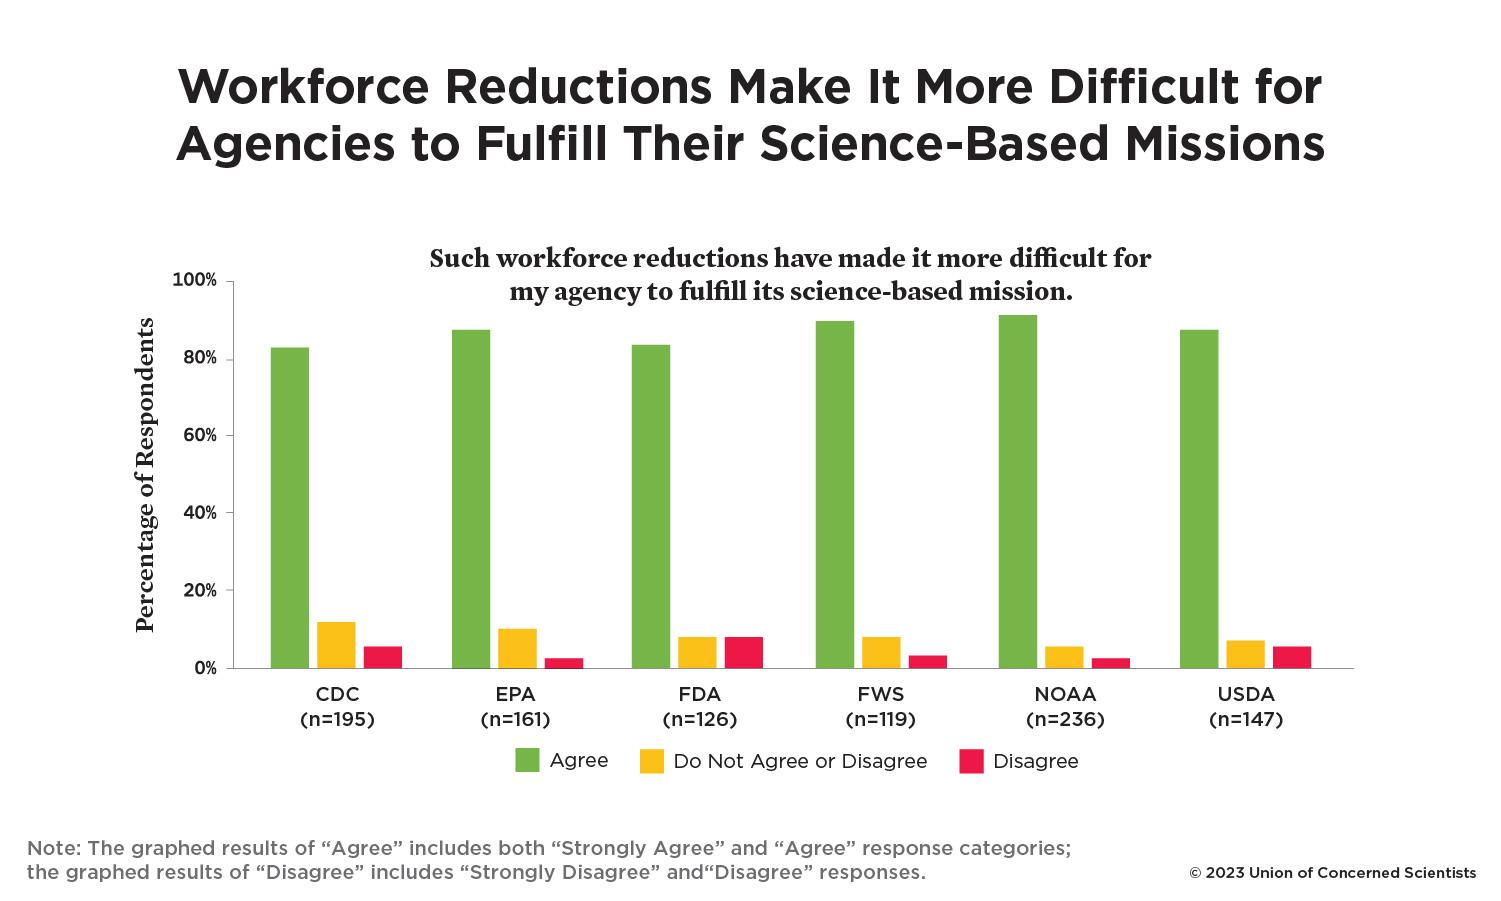 A bar graph showing agencies thoughts on whether or not workforce reductions have made fulfilling their missions more difficult.